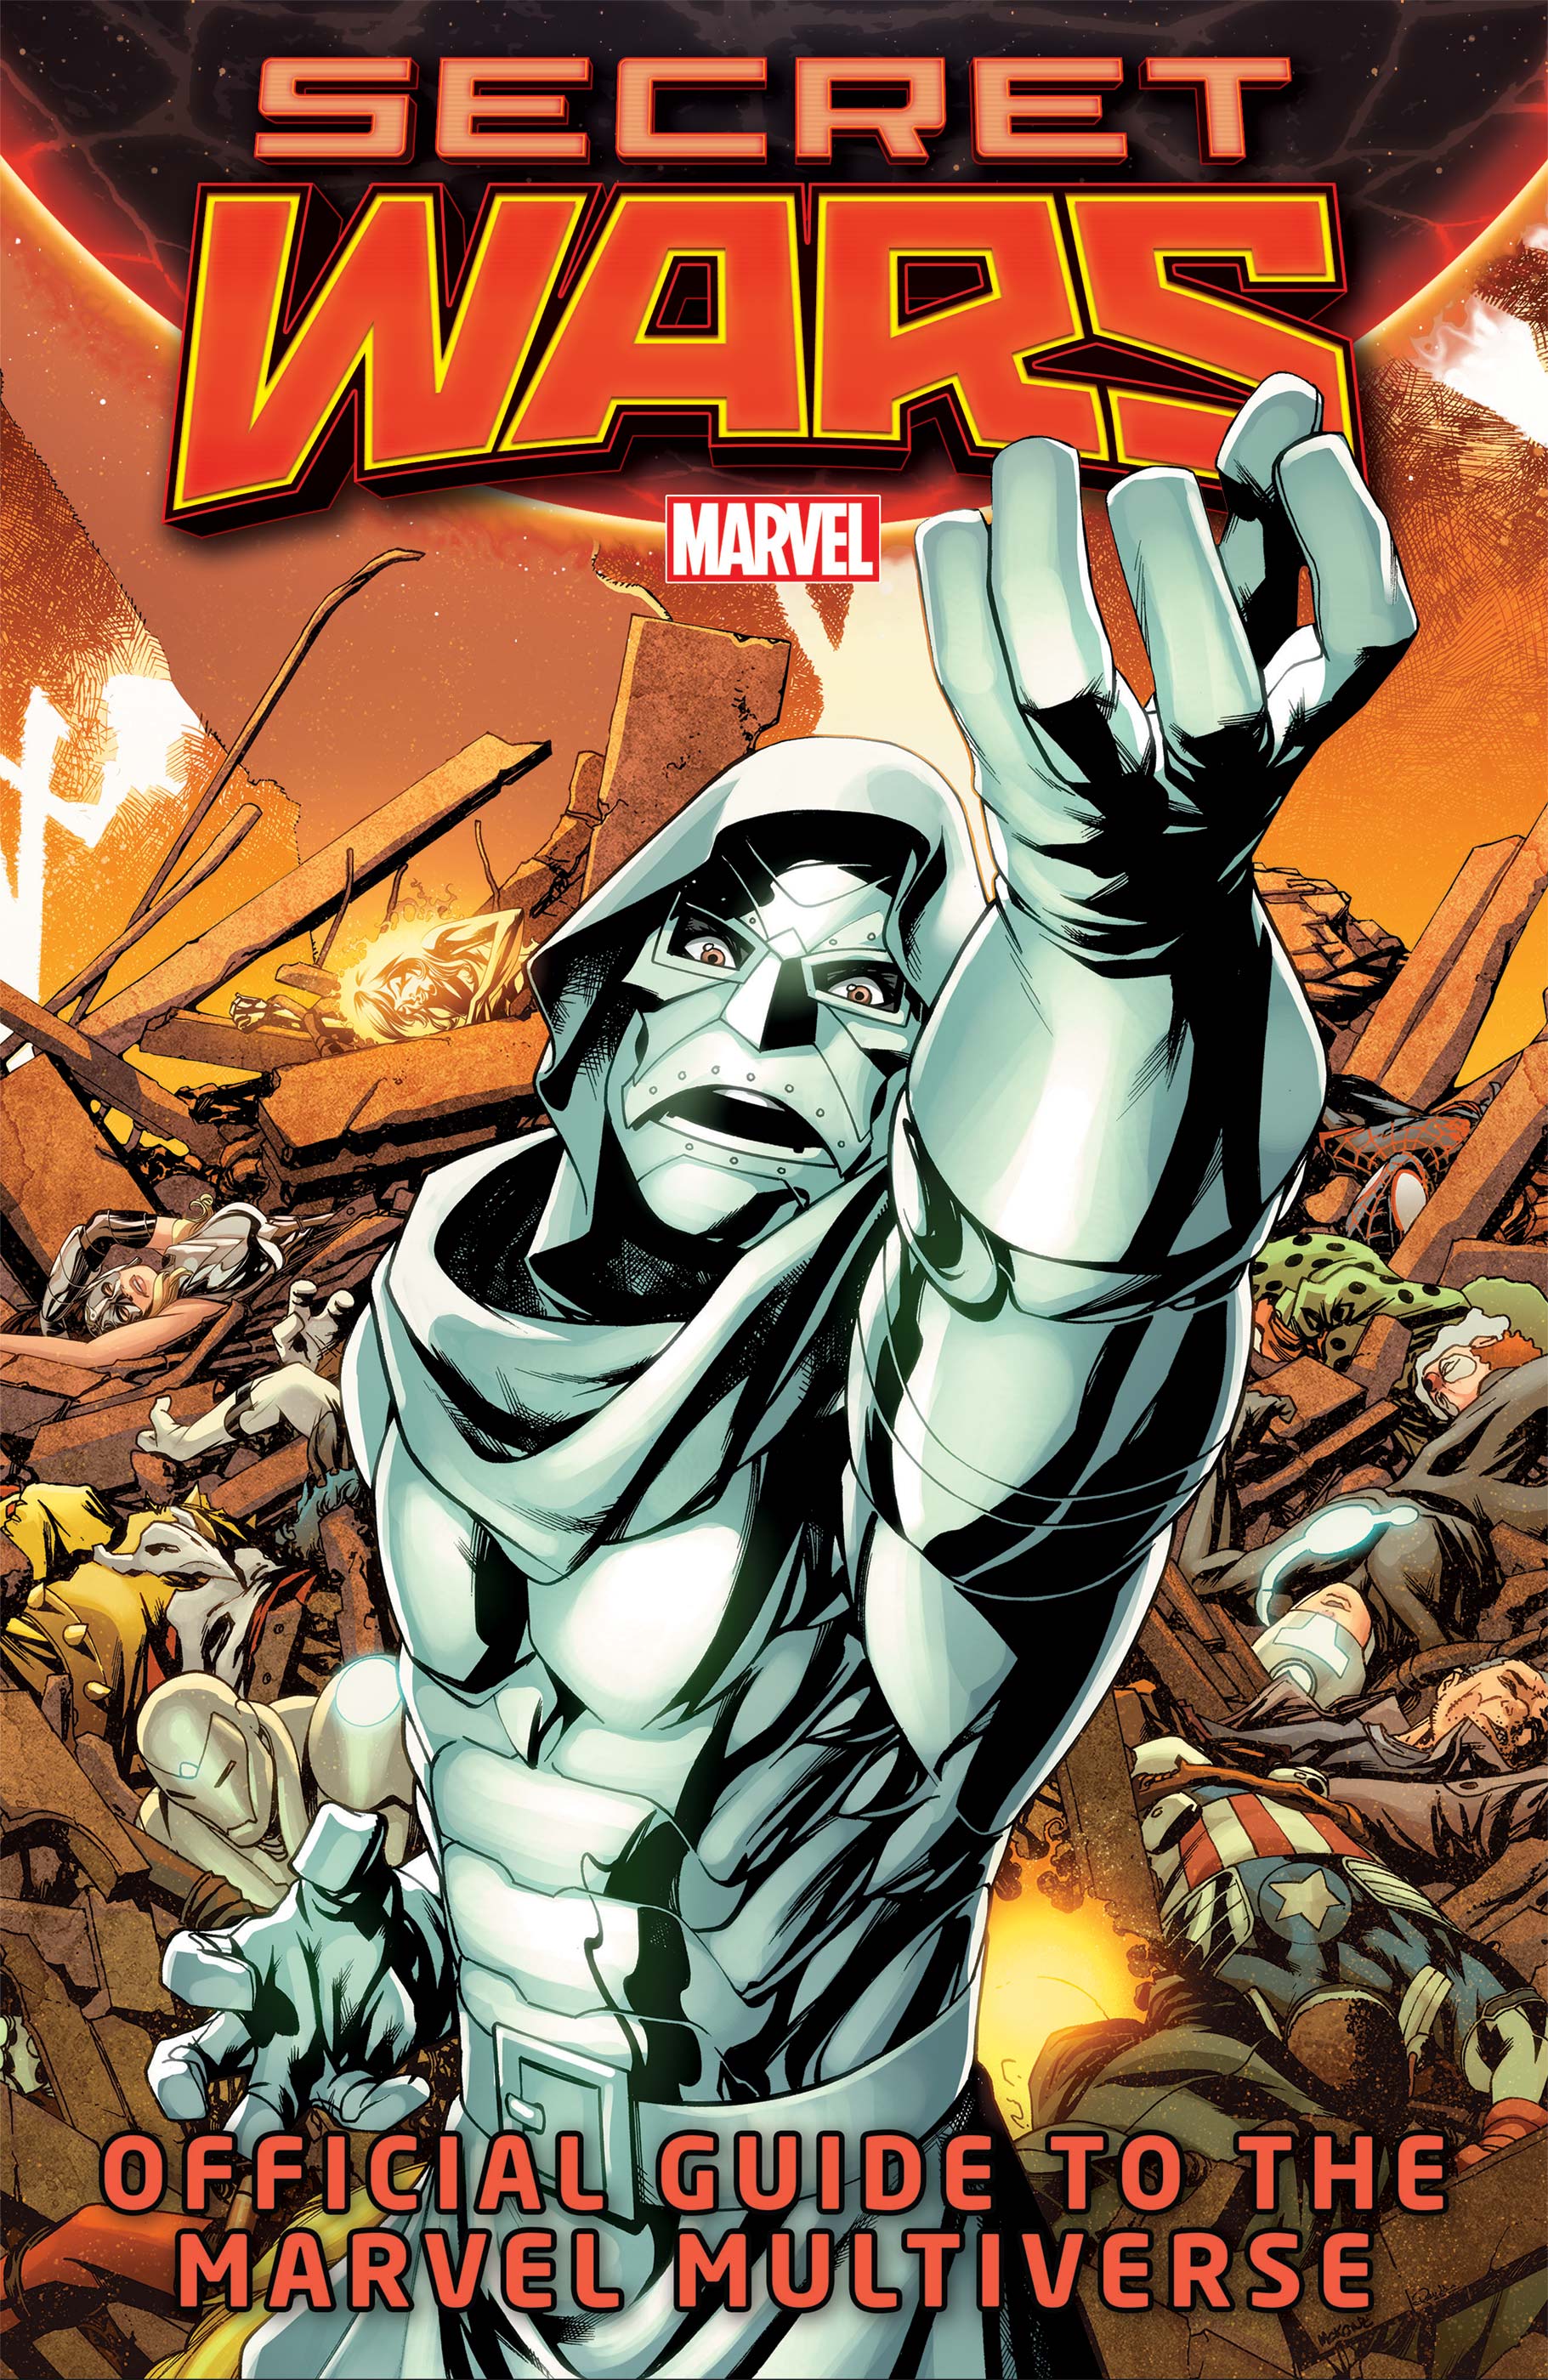 Secret Wars: Official Guide to the Marvel Multiverse (2015) #1